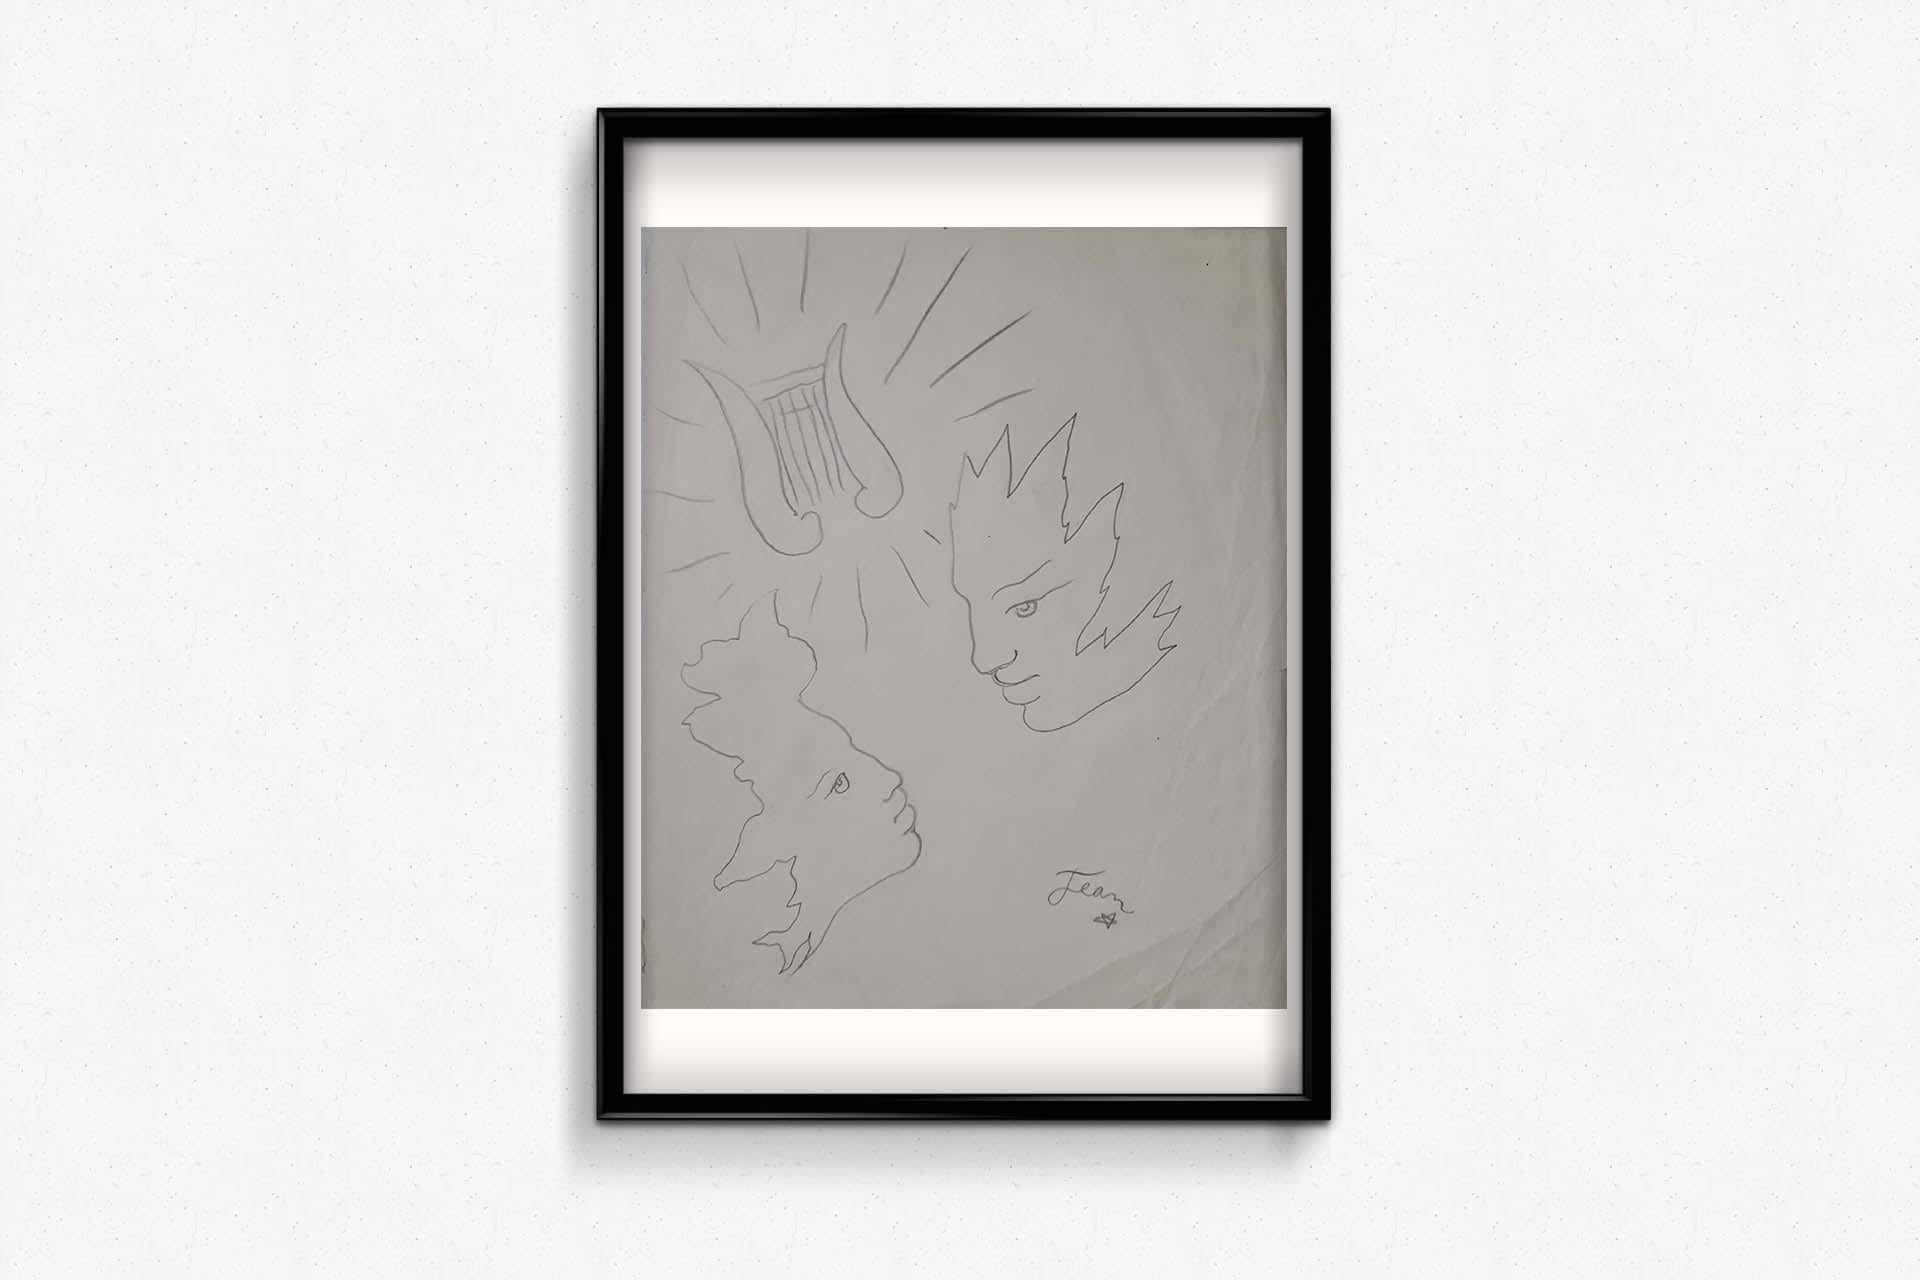 Jean Cocteau's drawing, 